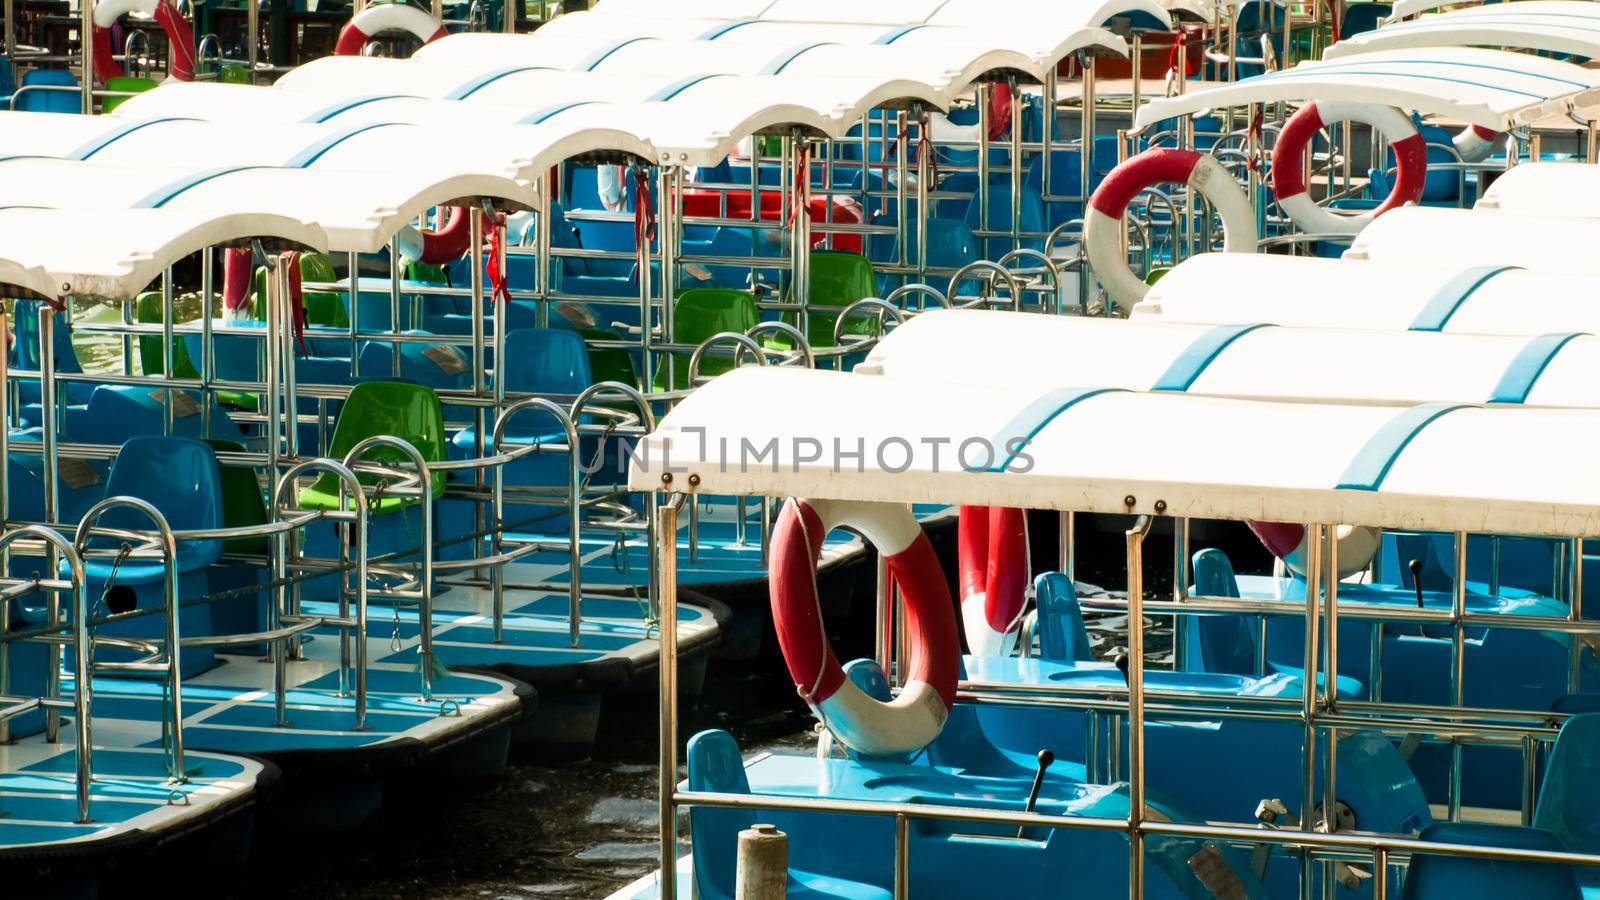 Catamarans in Summer Palace in Beijing, China